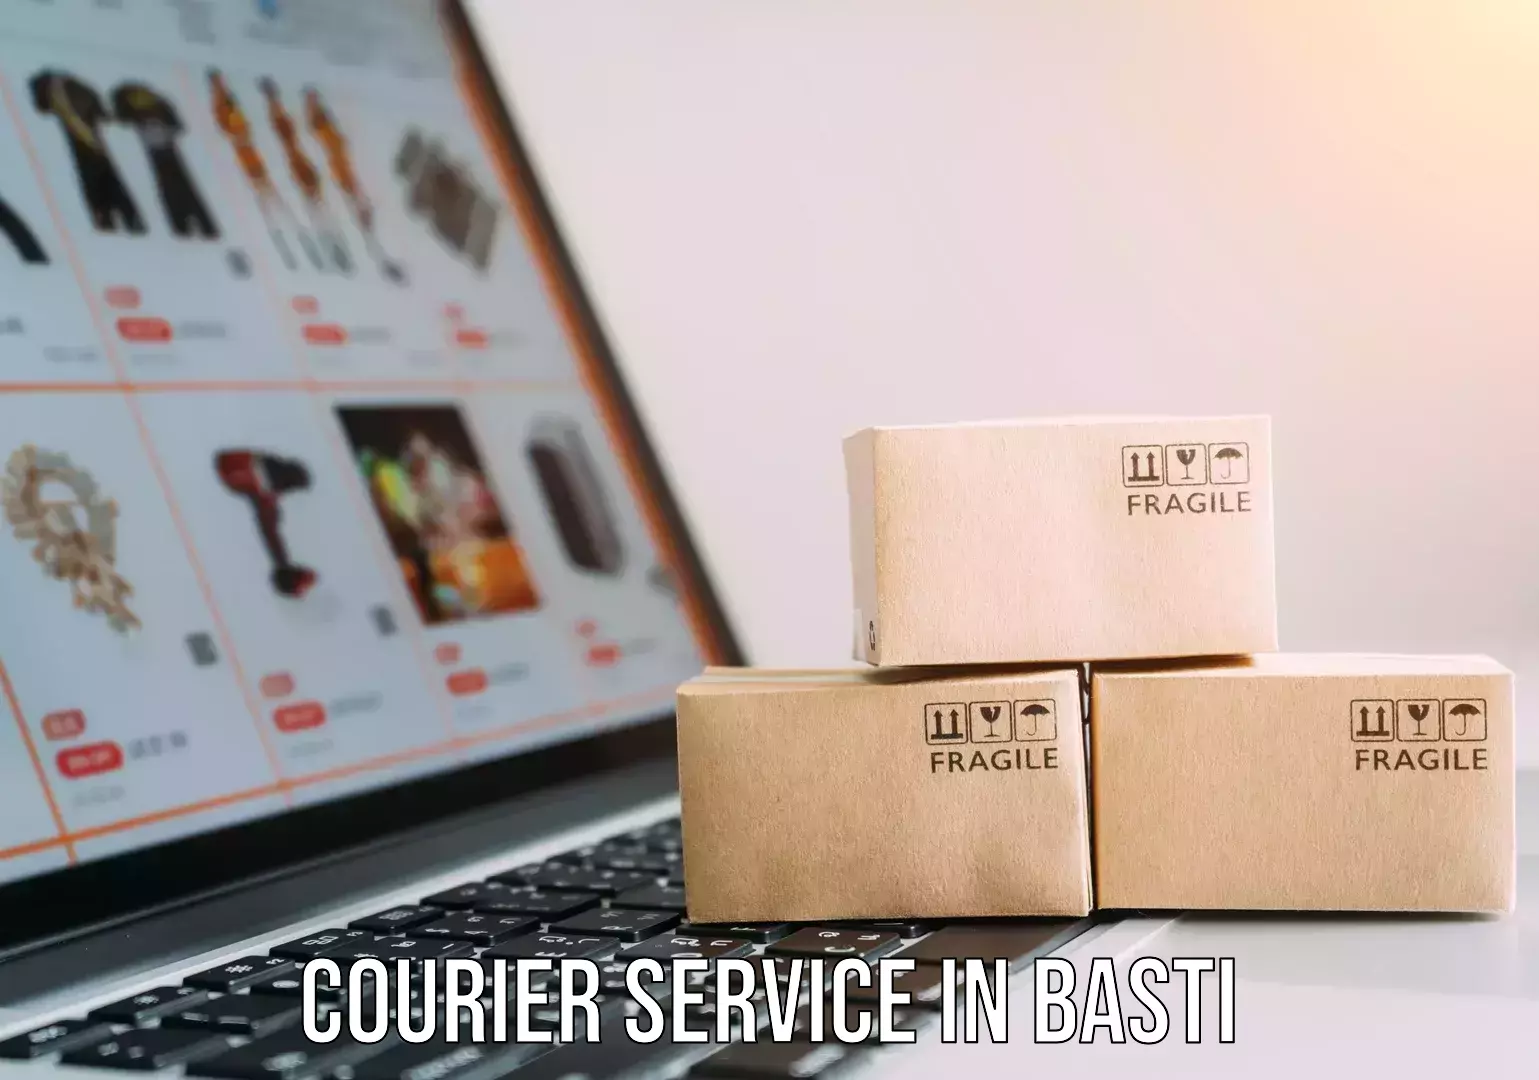 24-hour delivery options in Basti